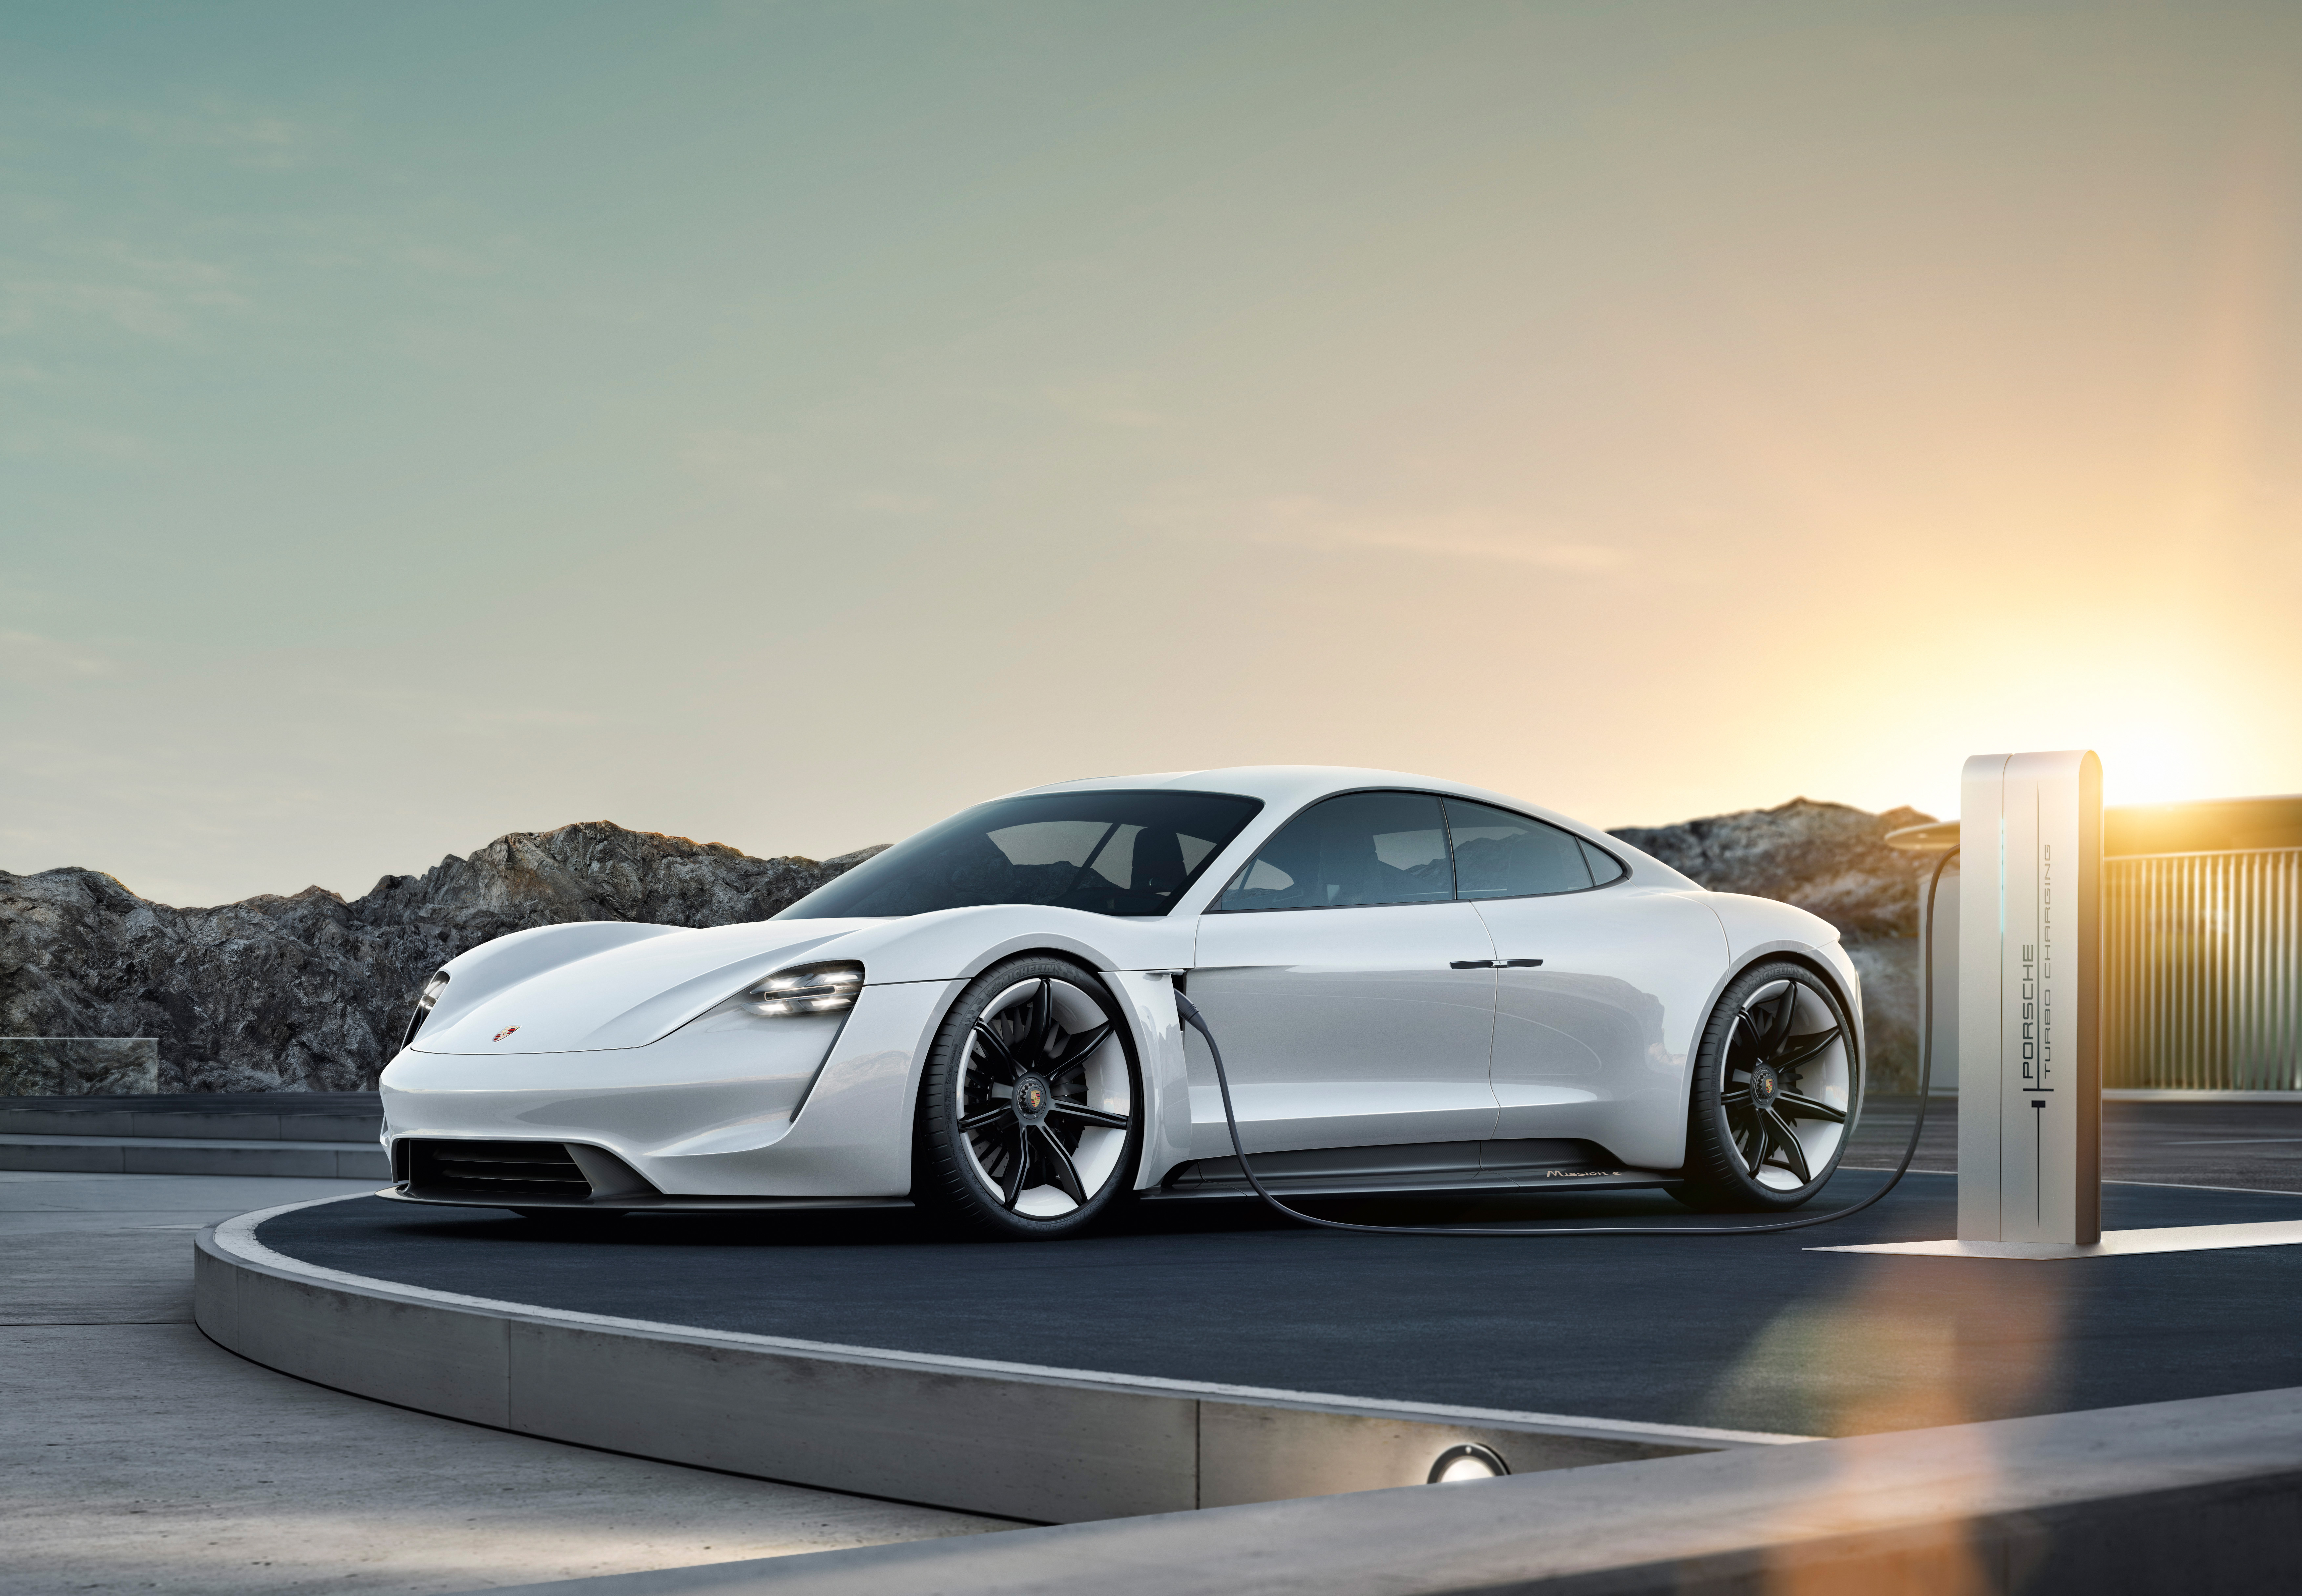 Porsche Taycan owners will get three years free charging at hundreds of Electrify America stations